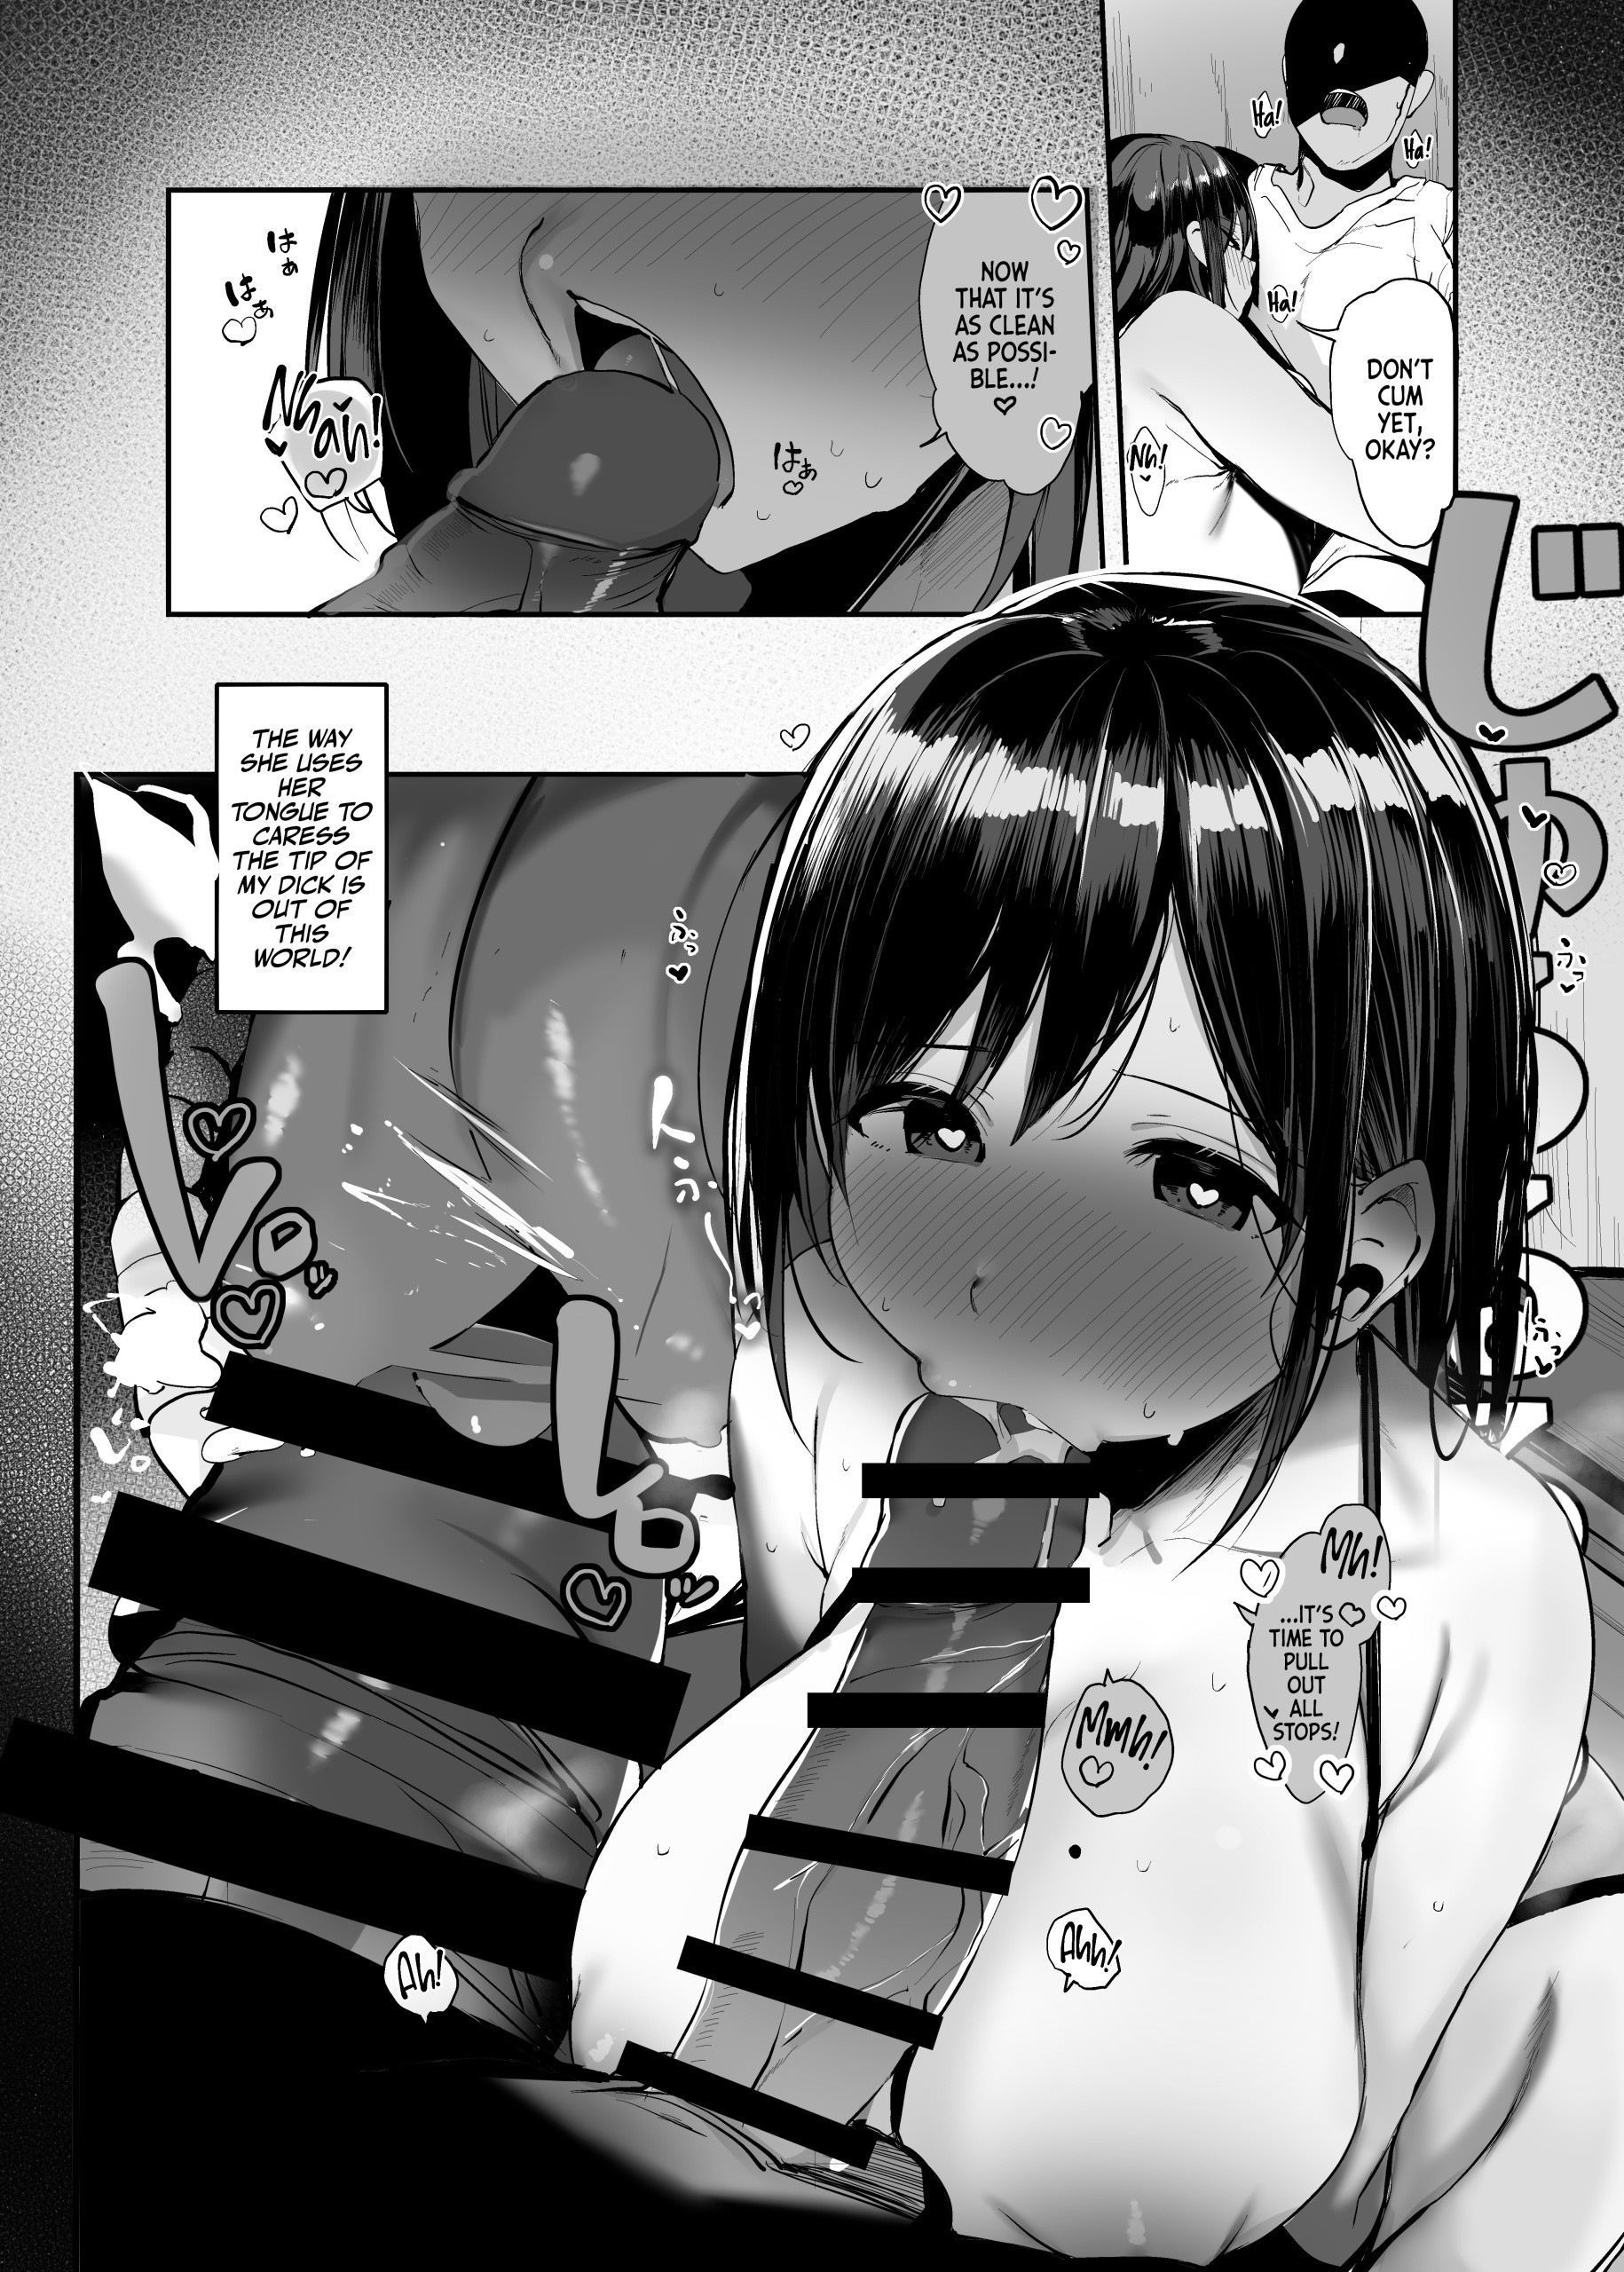 Can I Stay Over, Mister hentai manga picture 8